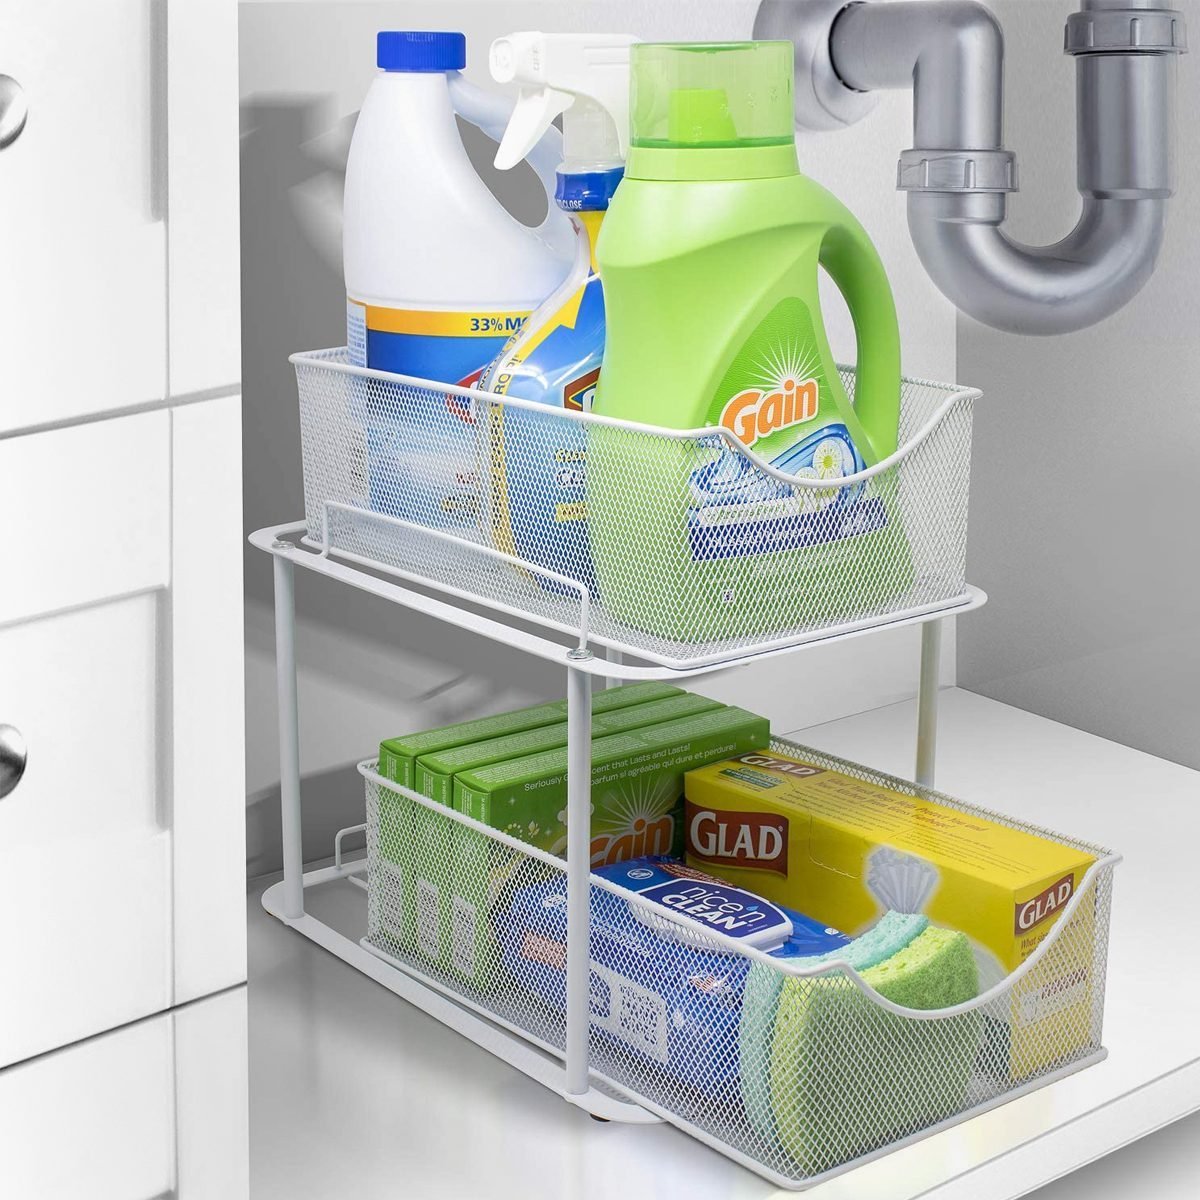 11 Best Under the Sink Organizers for the Bathroom and Kitchen